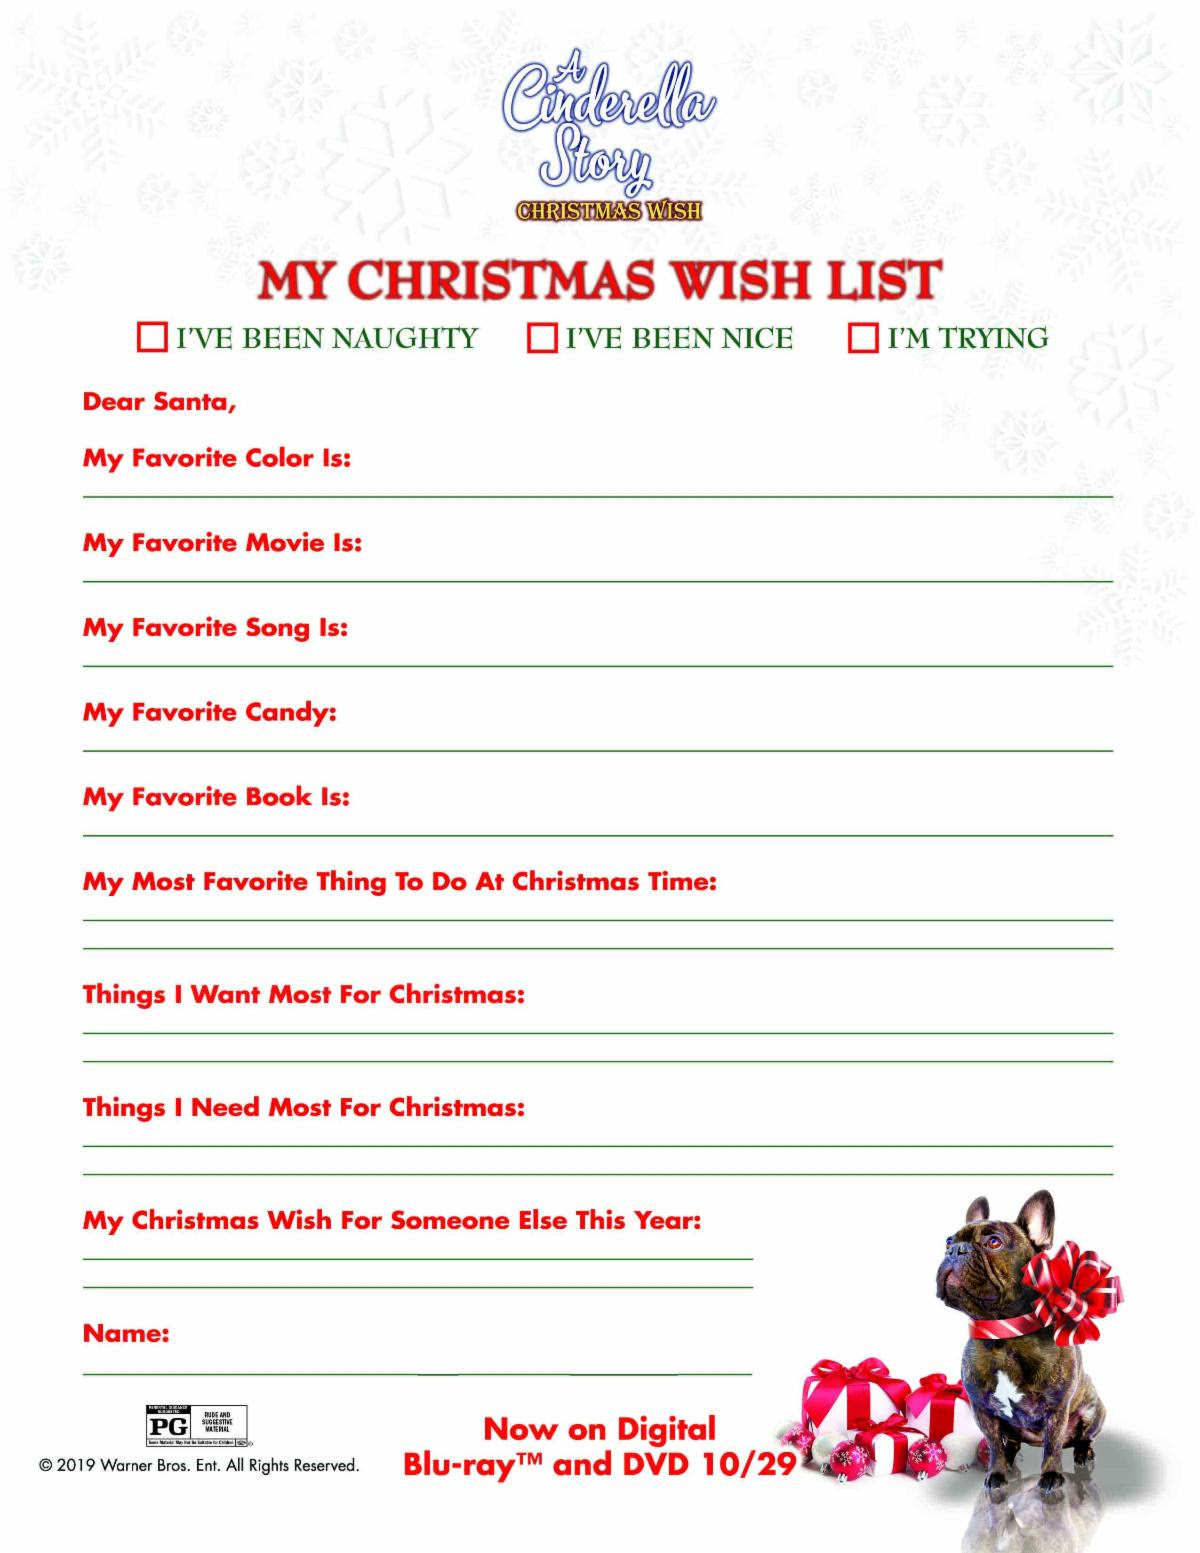 a-cinderella-story-christmas-wish-downloadable-christmas-wish-list-cinderellachristmas